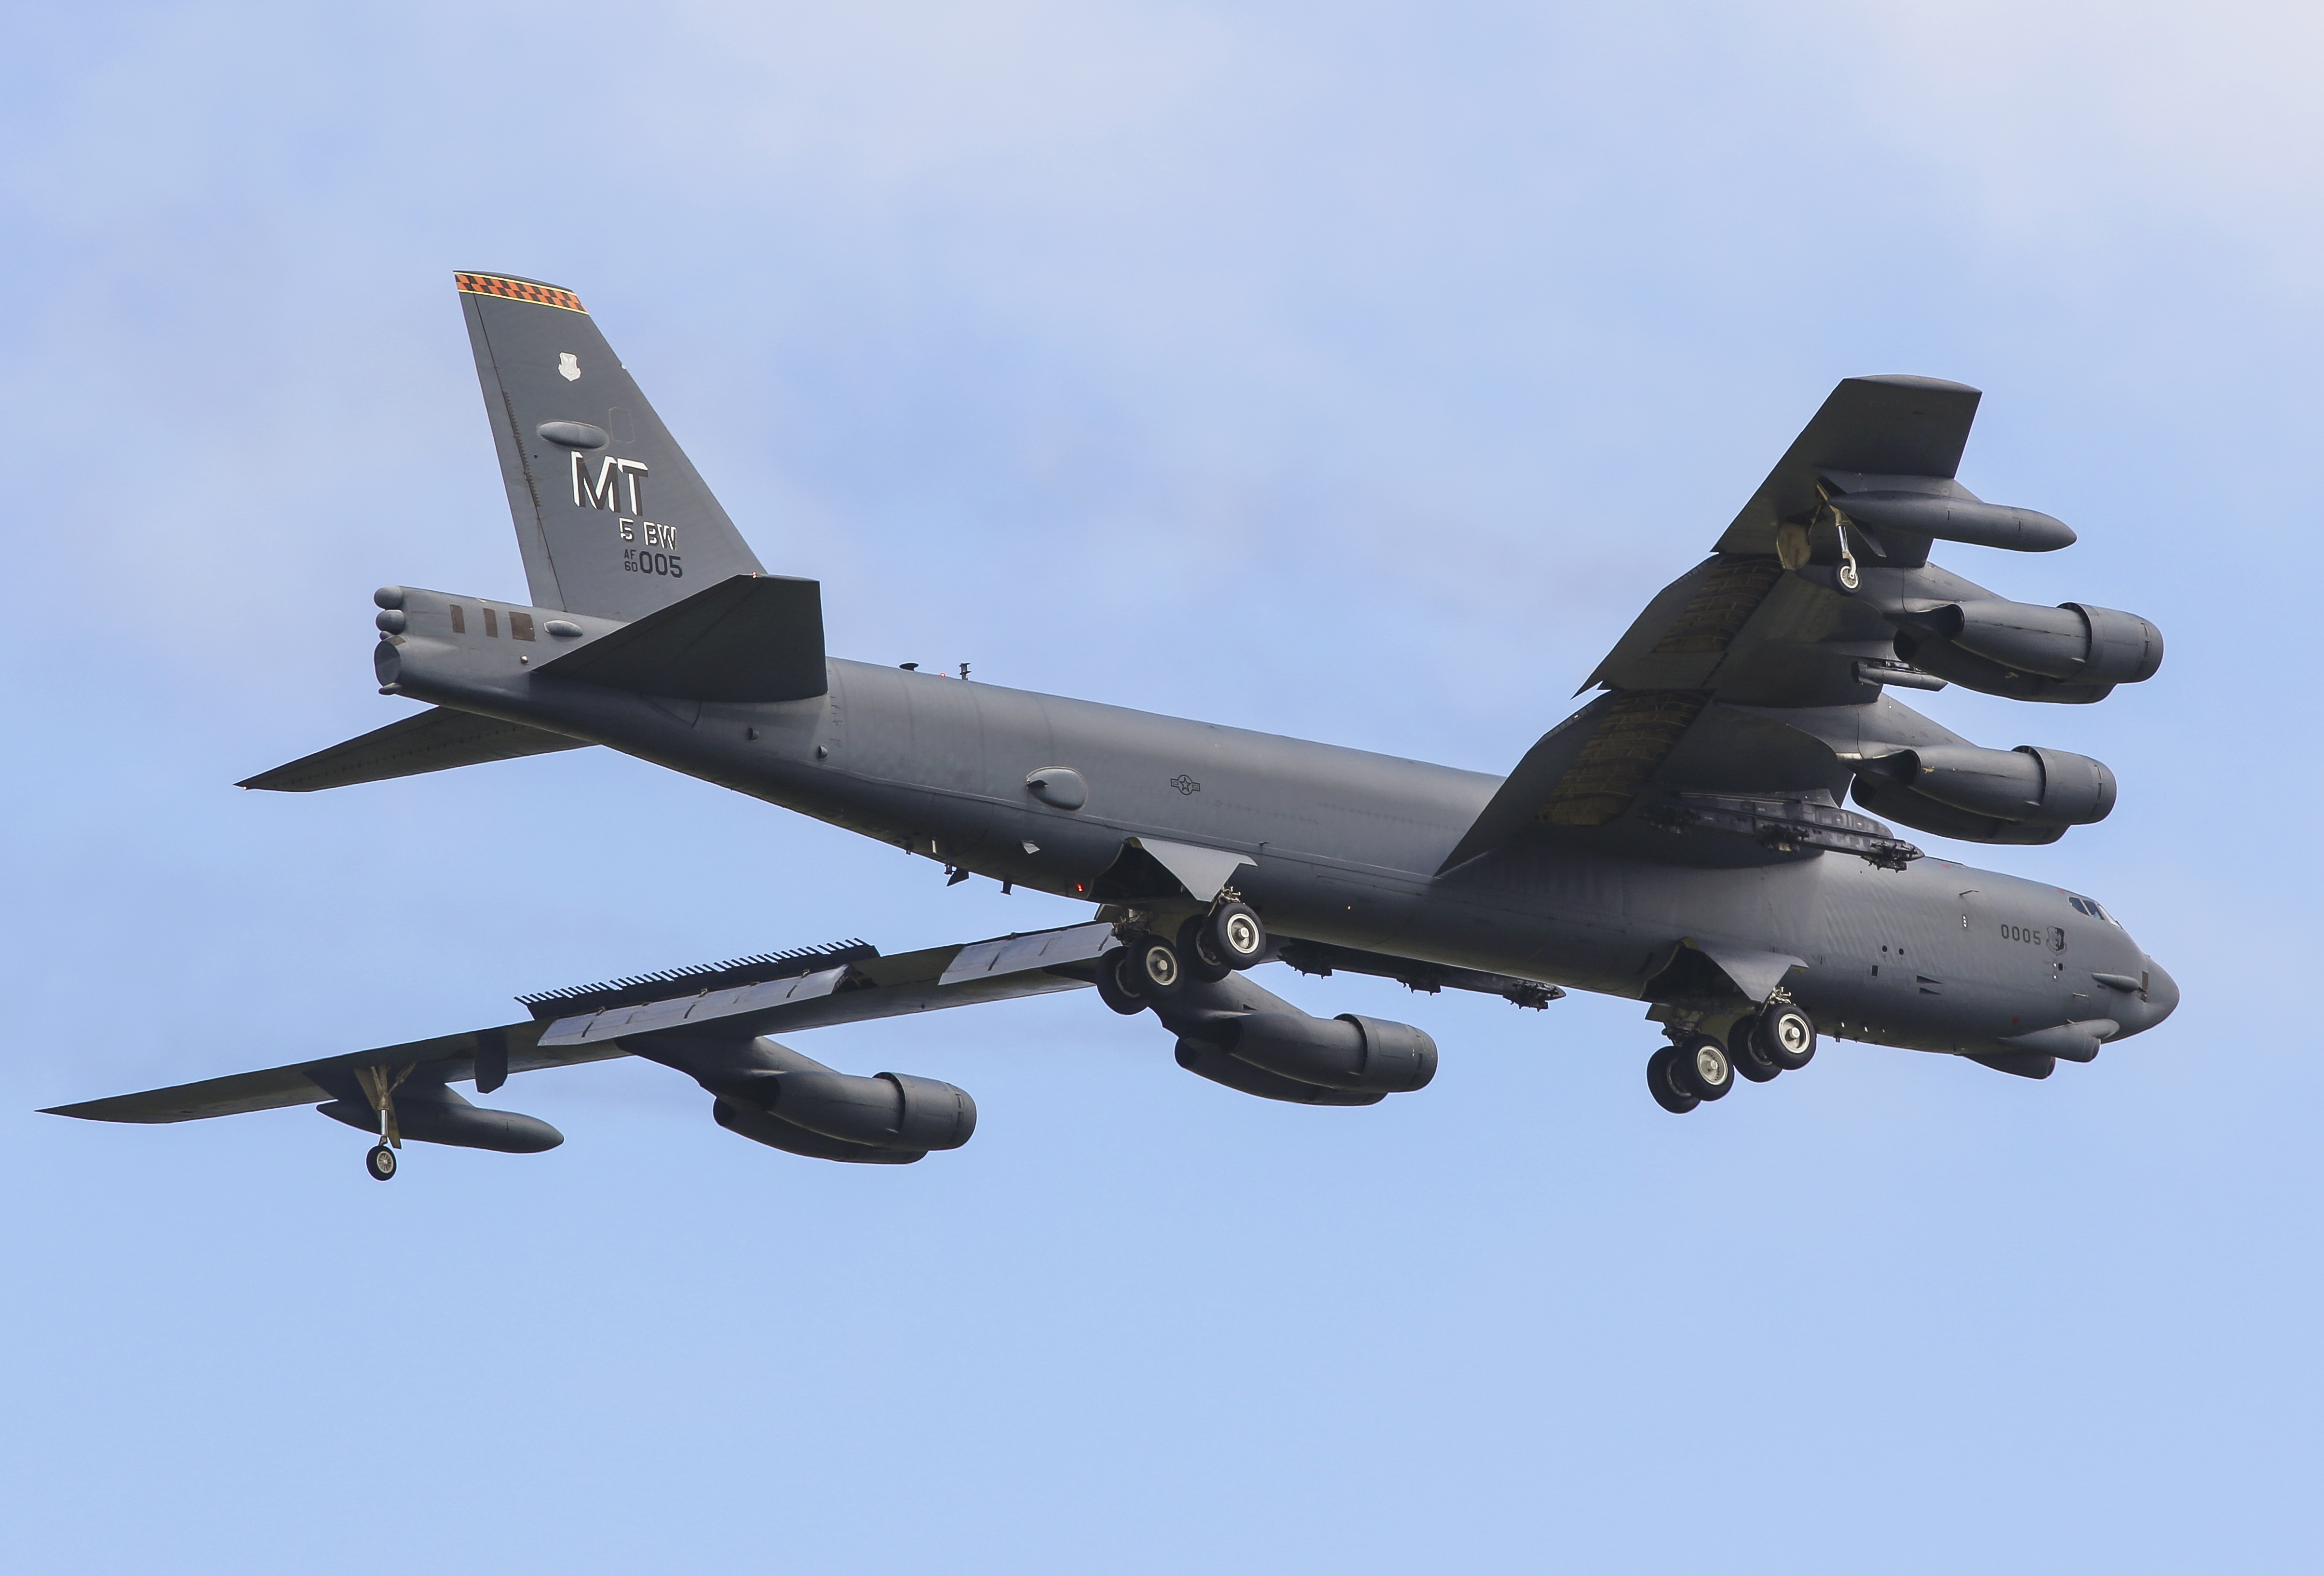 air force, military, boeing b 52 stratofortress, aircraft, airplane, bomber, warplane, bombers